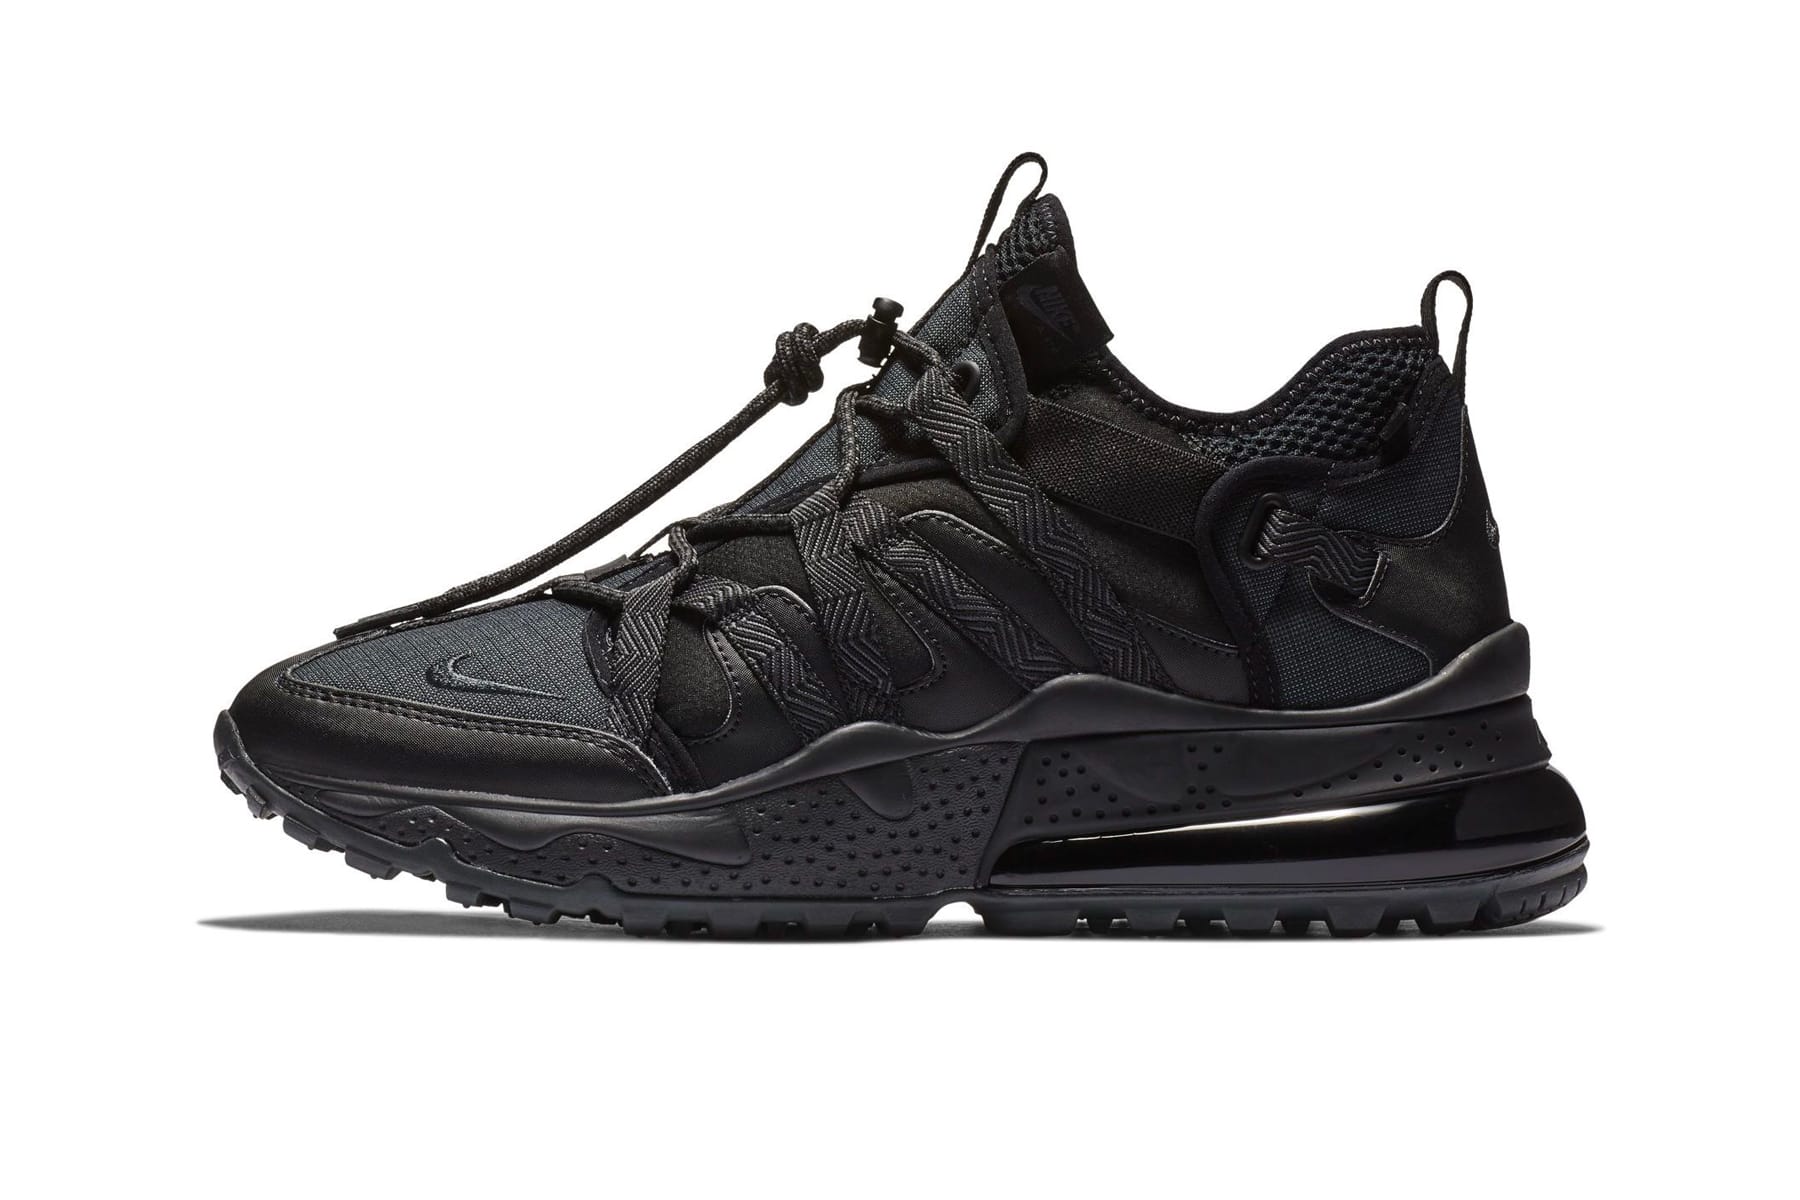 Nike Covers the Air Max 270 Bowfin in a Slick “Triple Black” Color Scheme